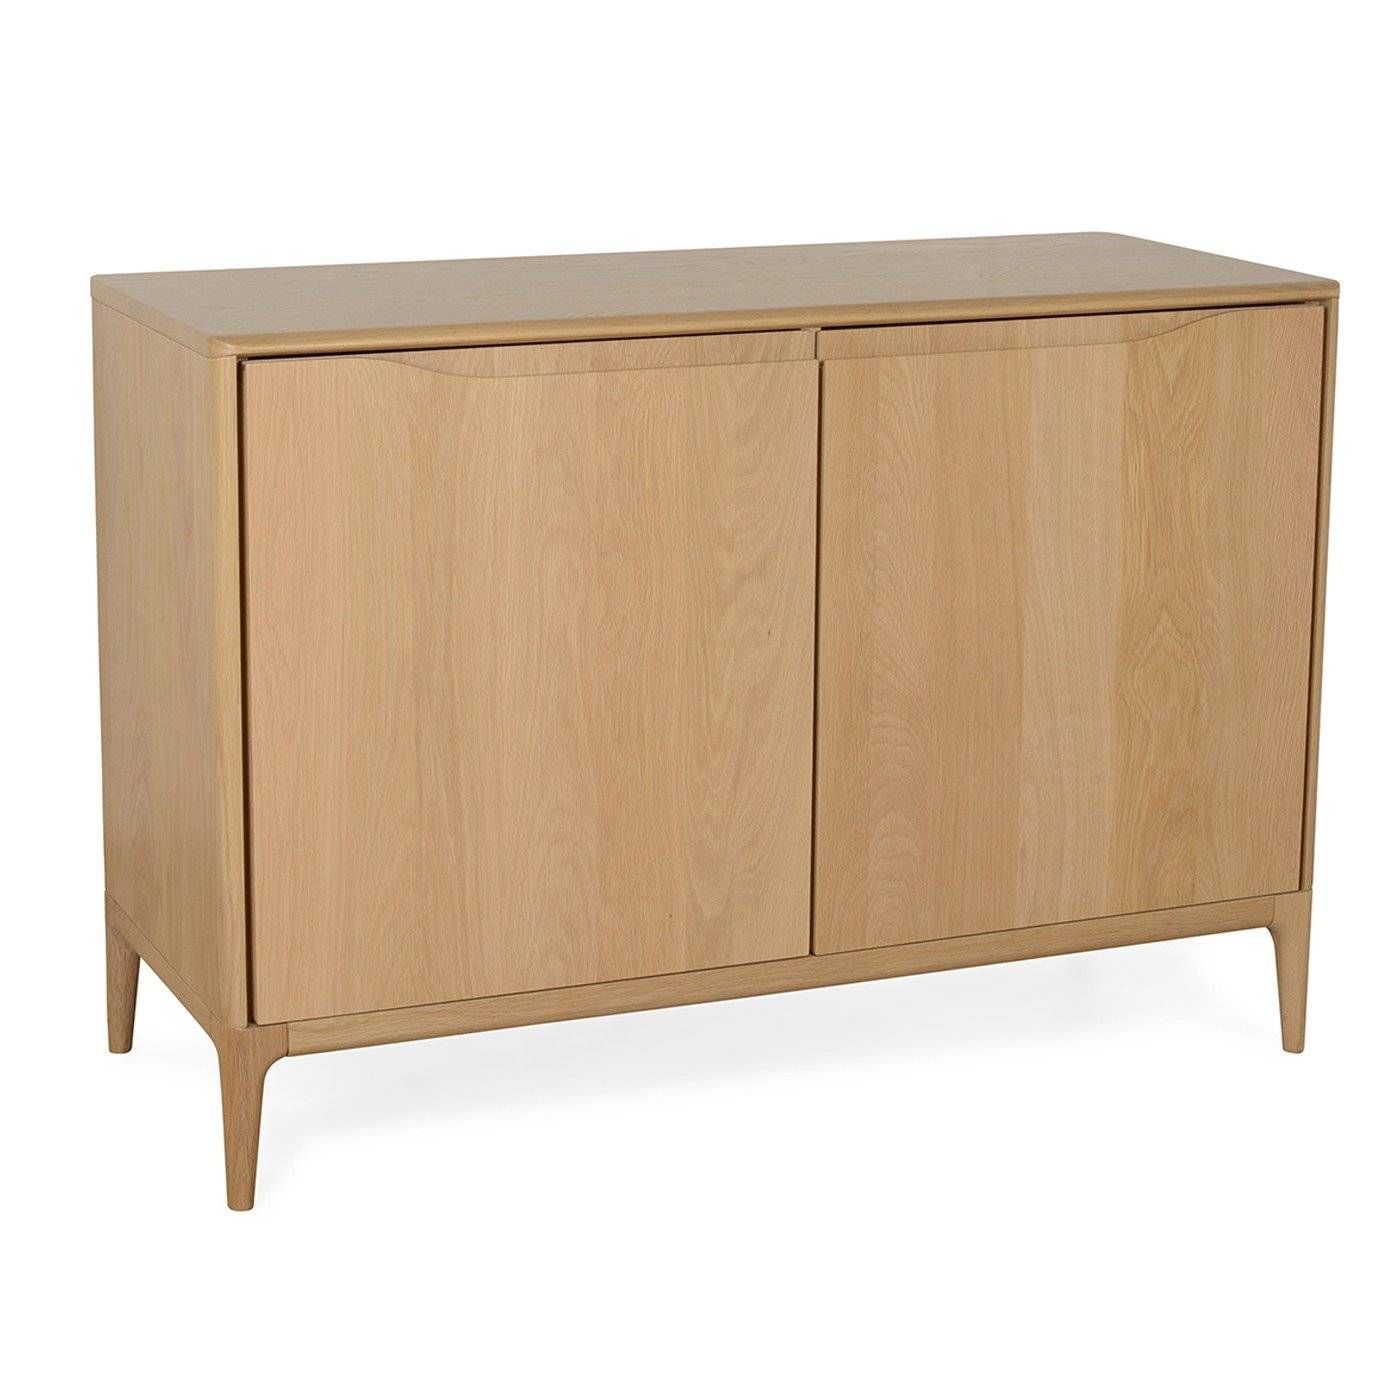 Romana Small Sideboard 2 Door Dead Matt Oak – Storage – Living Within Small Sideboards With Drawers (View 8 of 15)